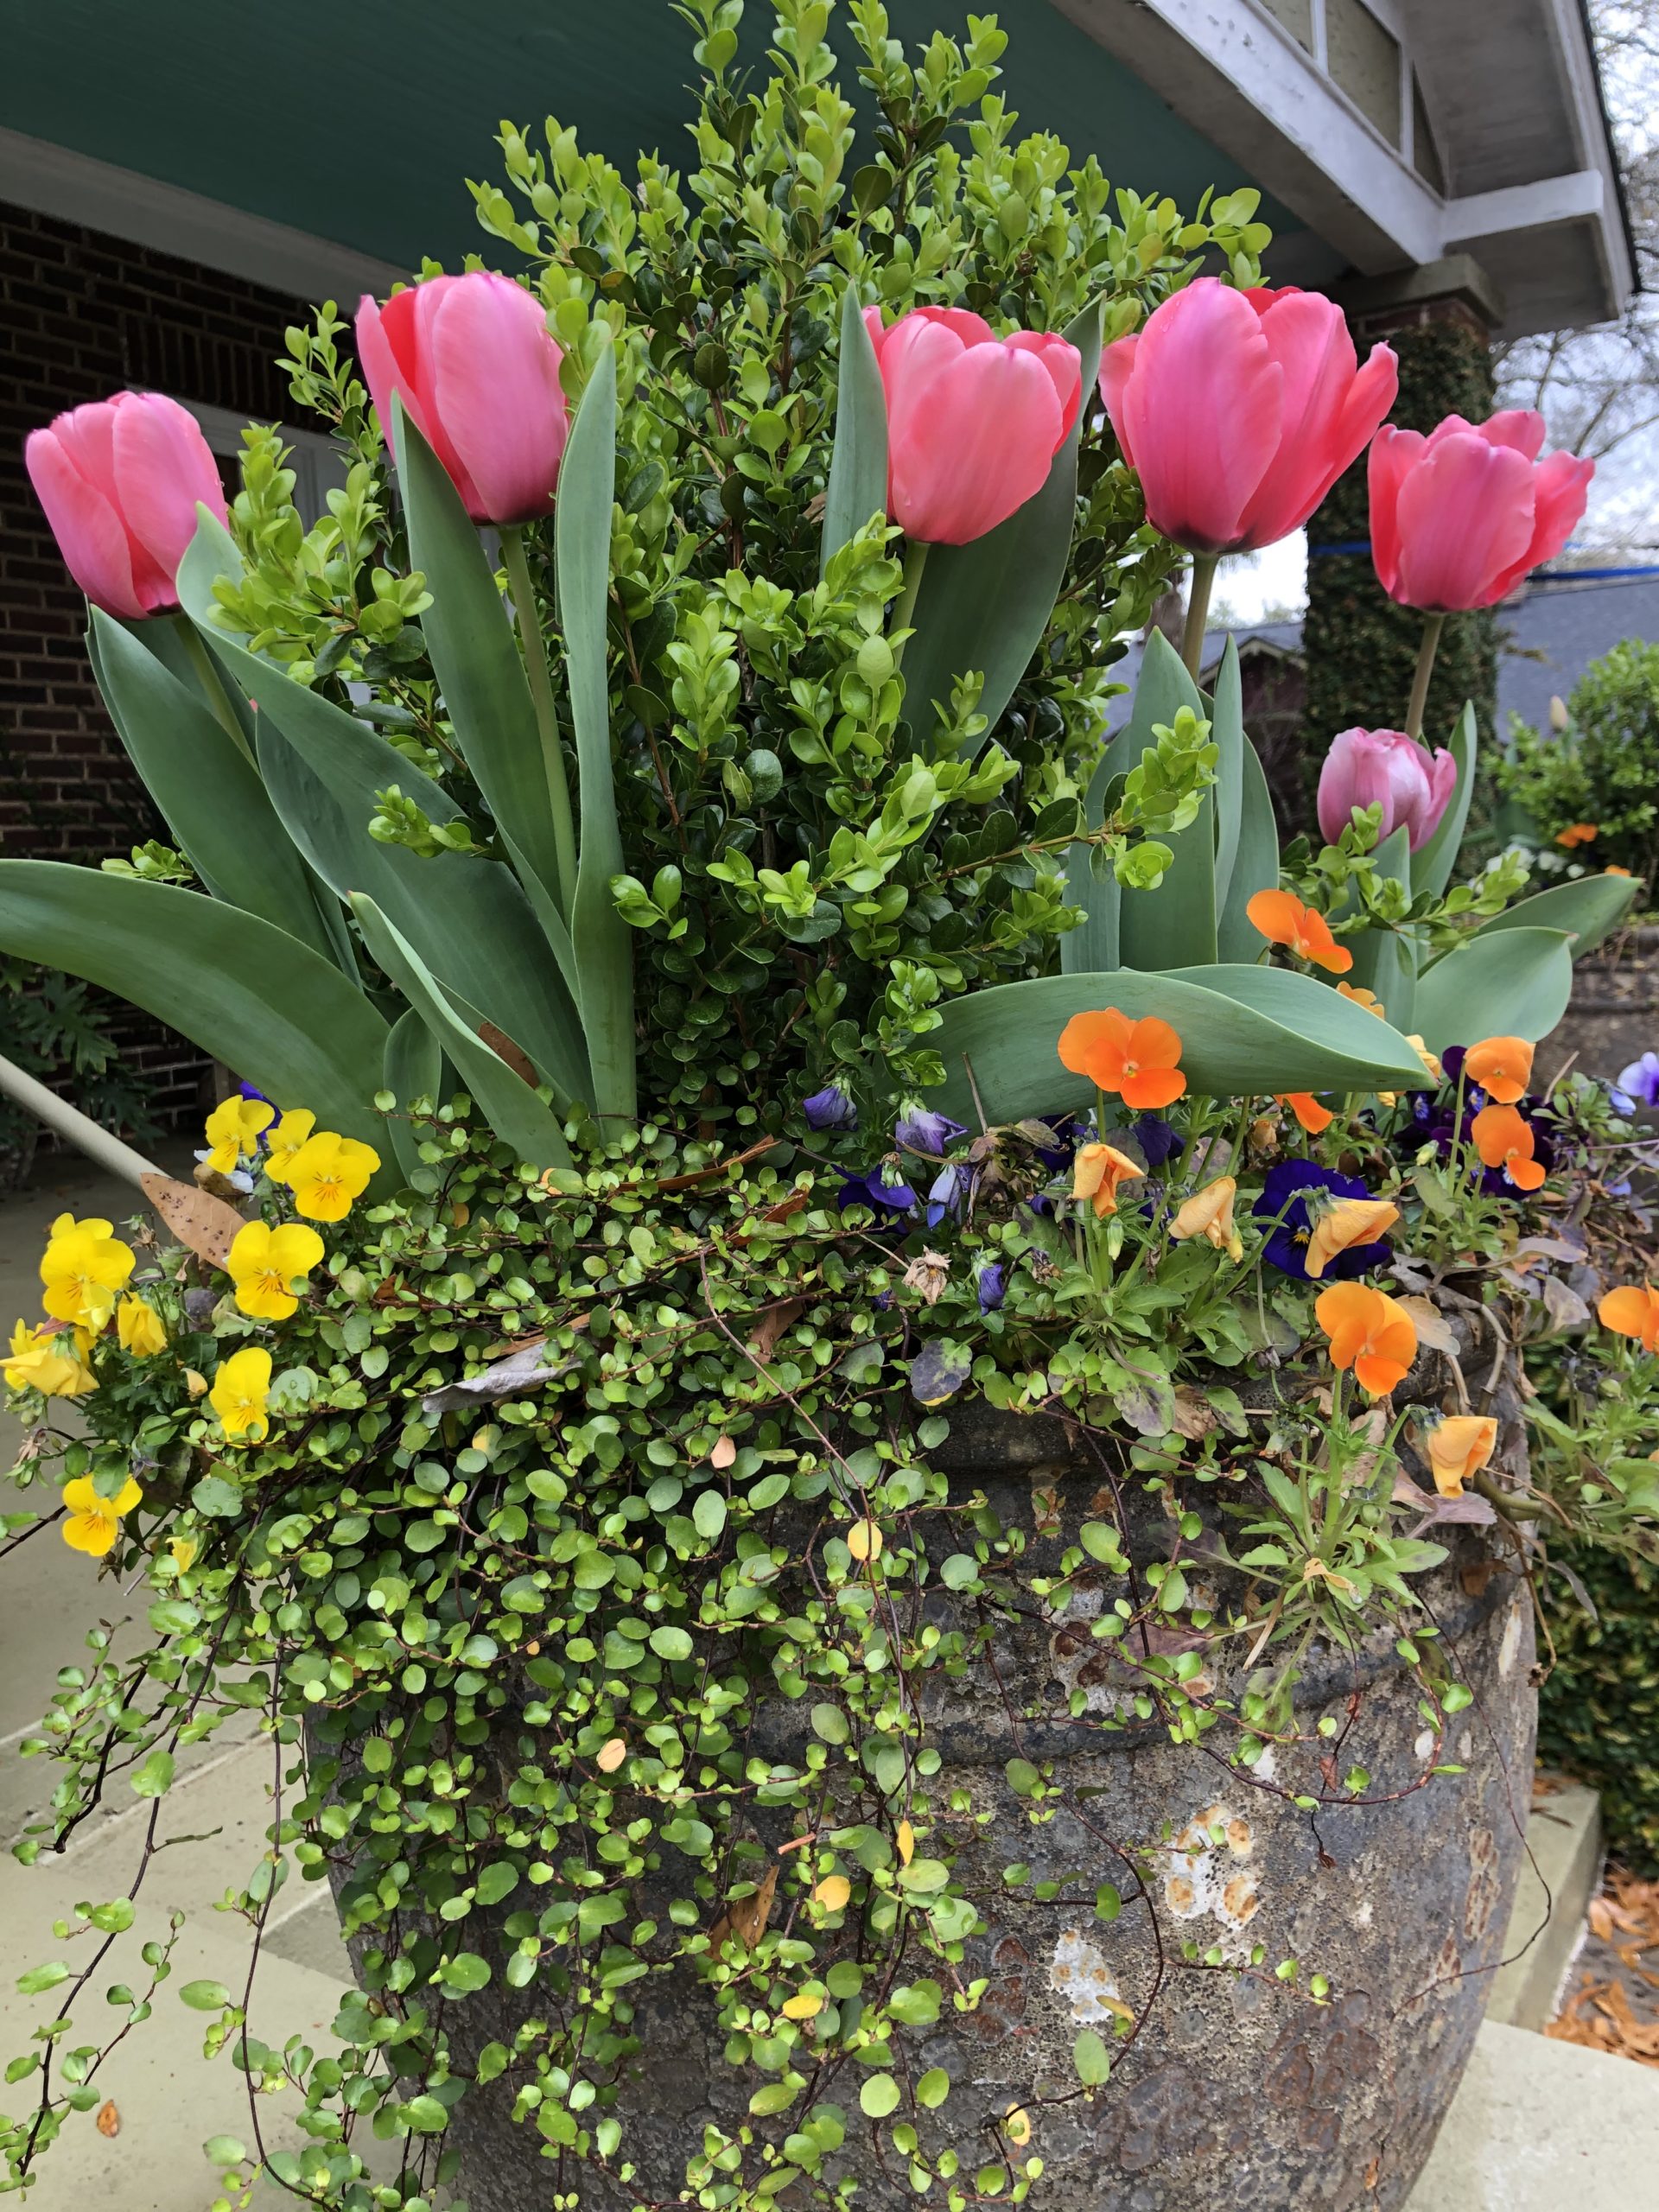 Tulips, Clematis & New Growth Everywhere, Spring 2021 in the Garden